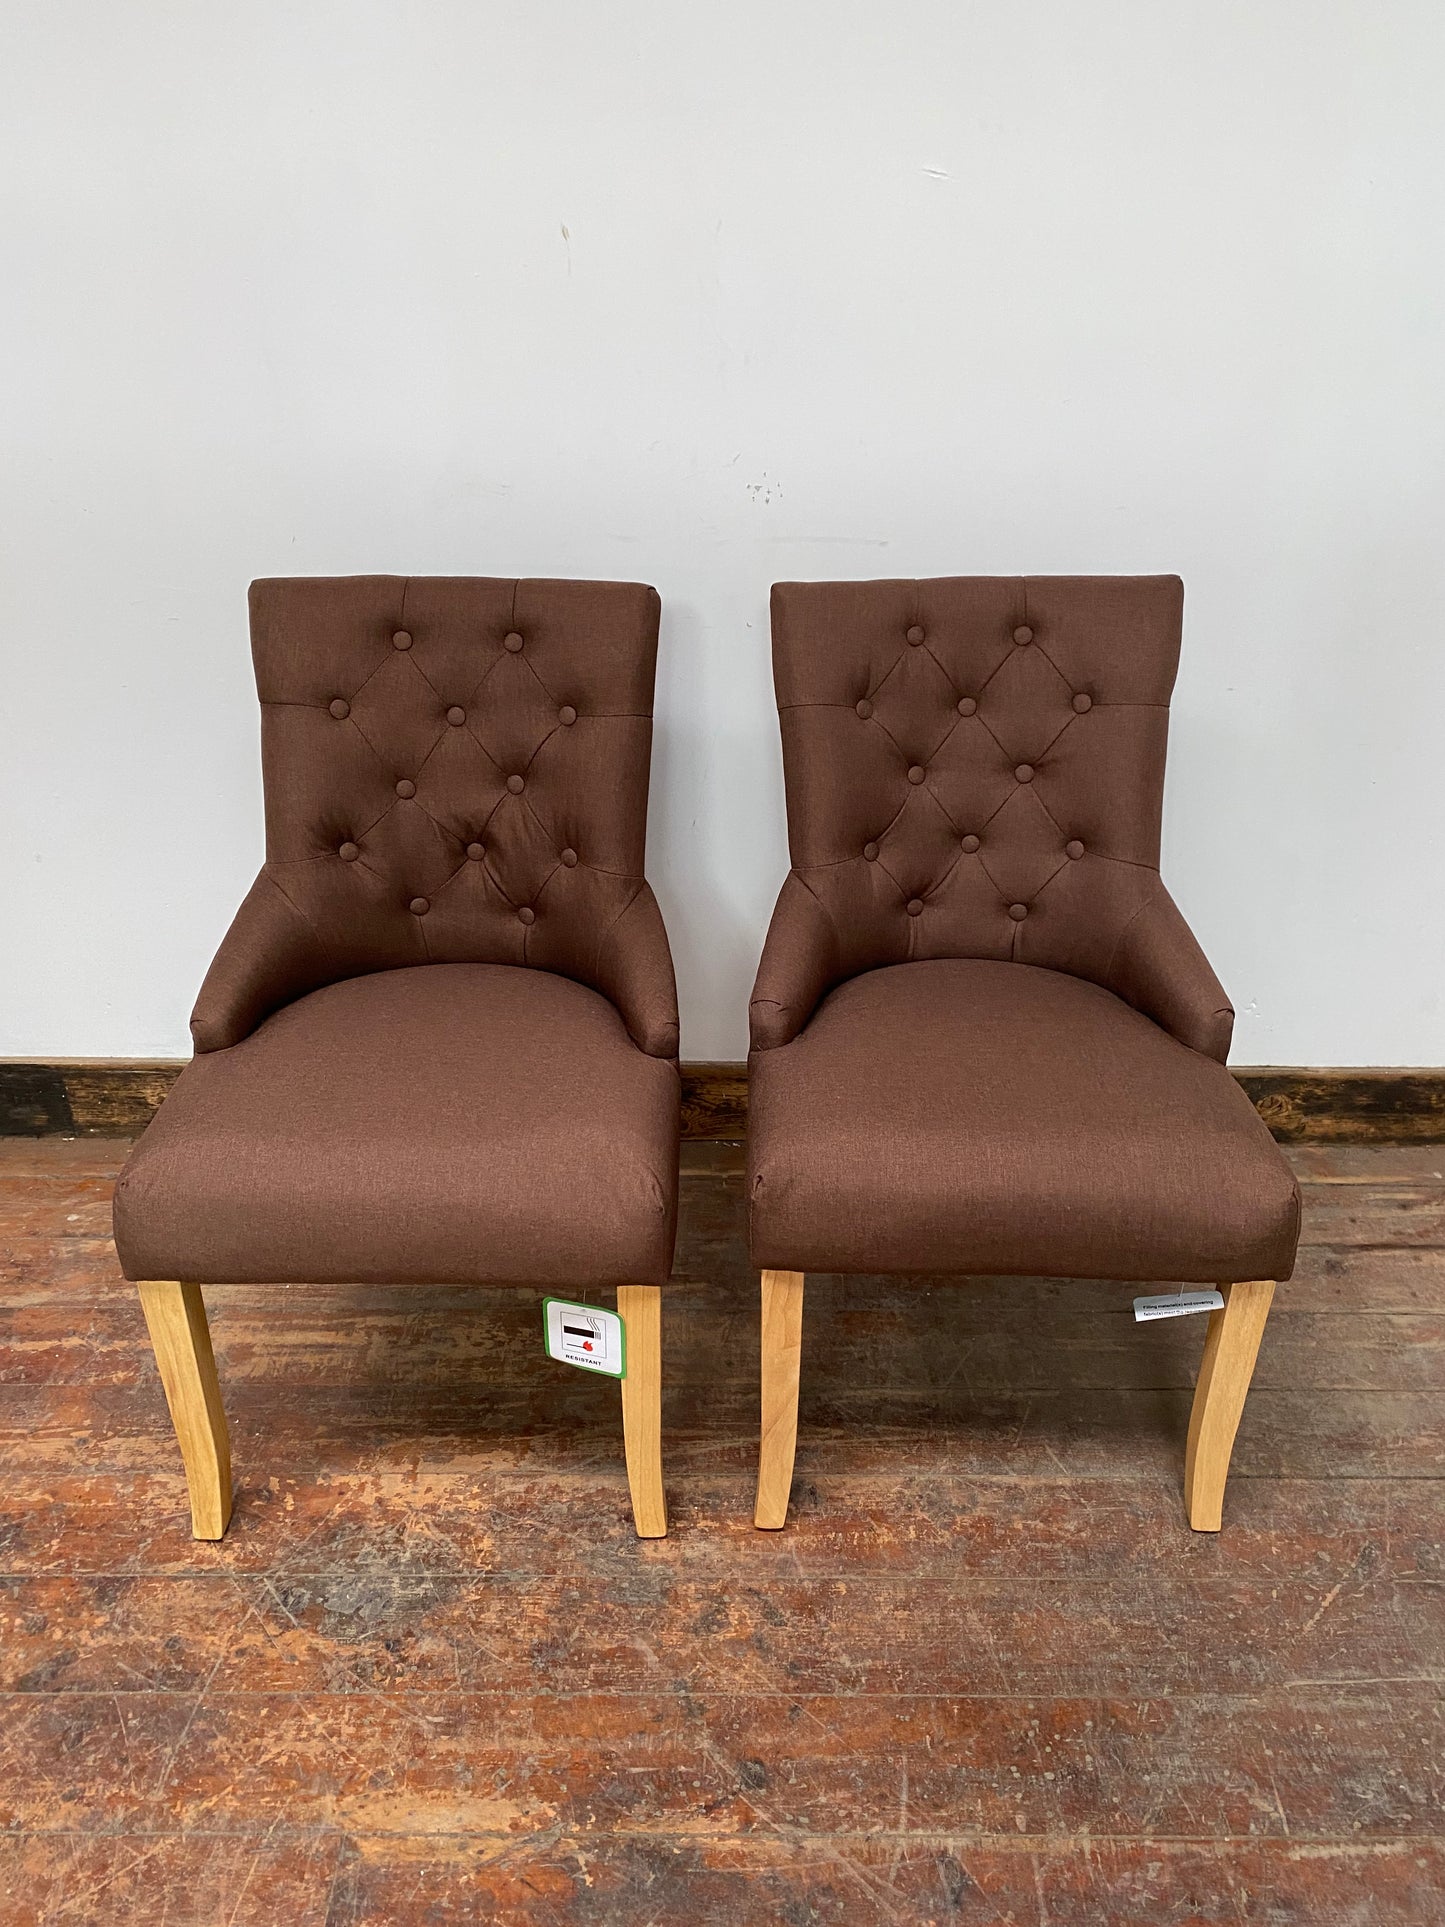 PAIR OF BROWN DINING CHAIRS (NEW)